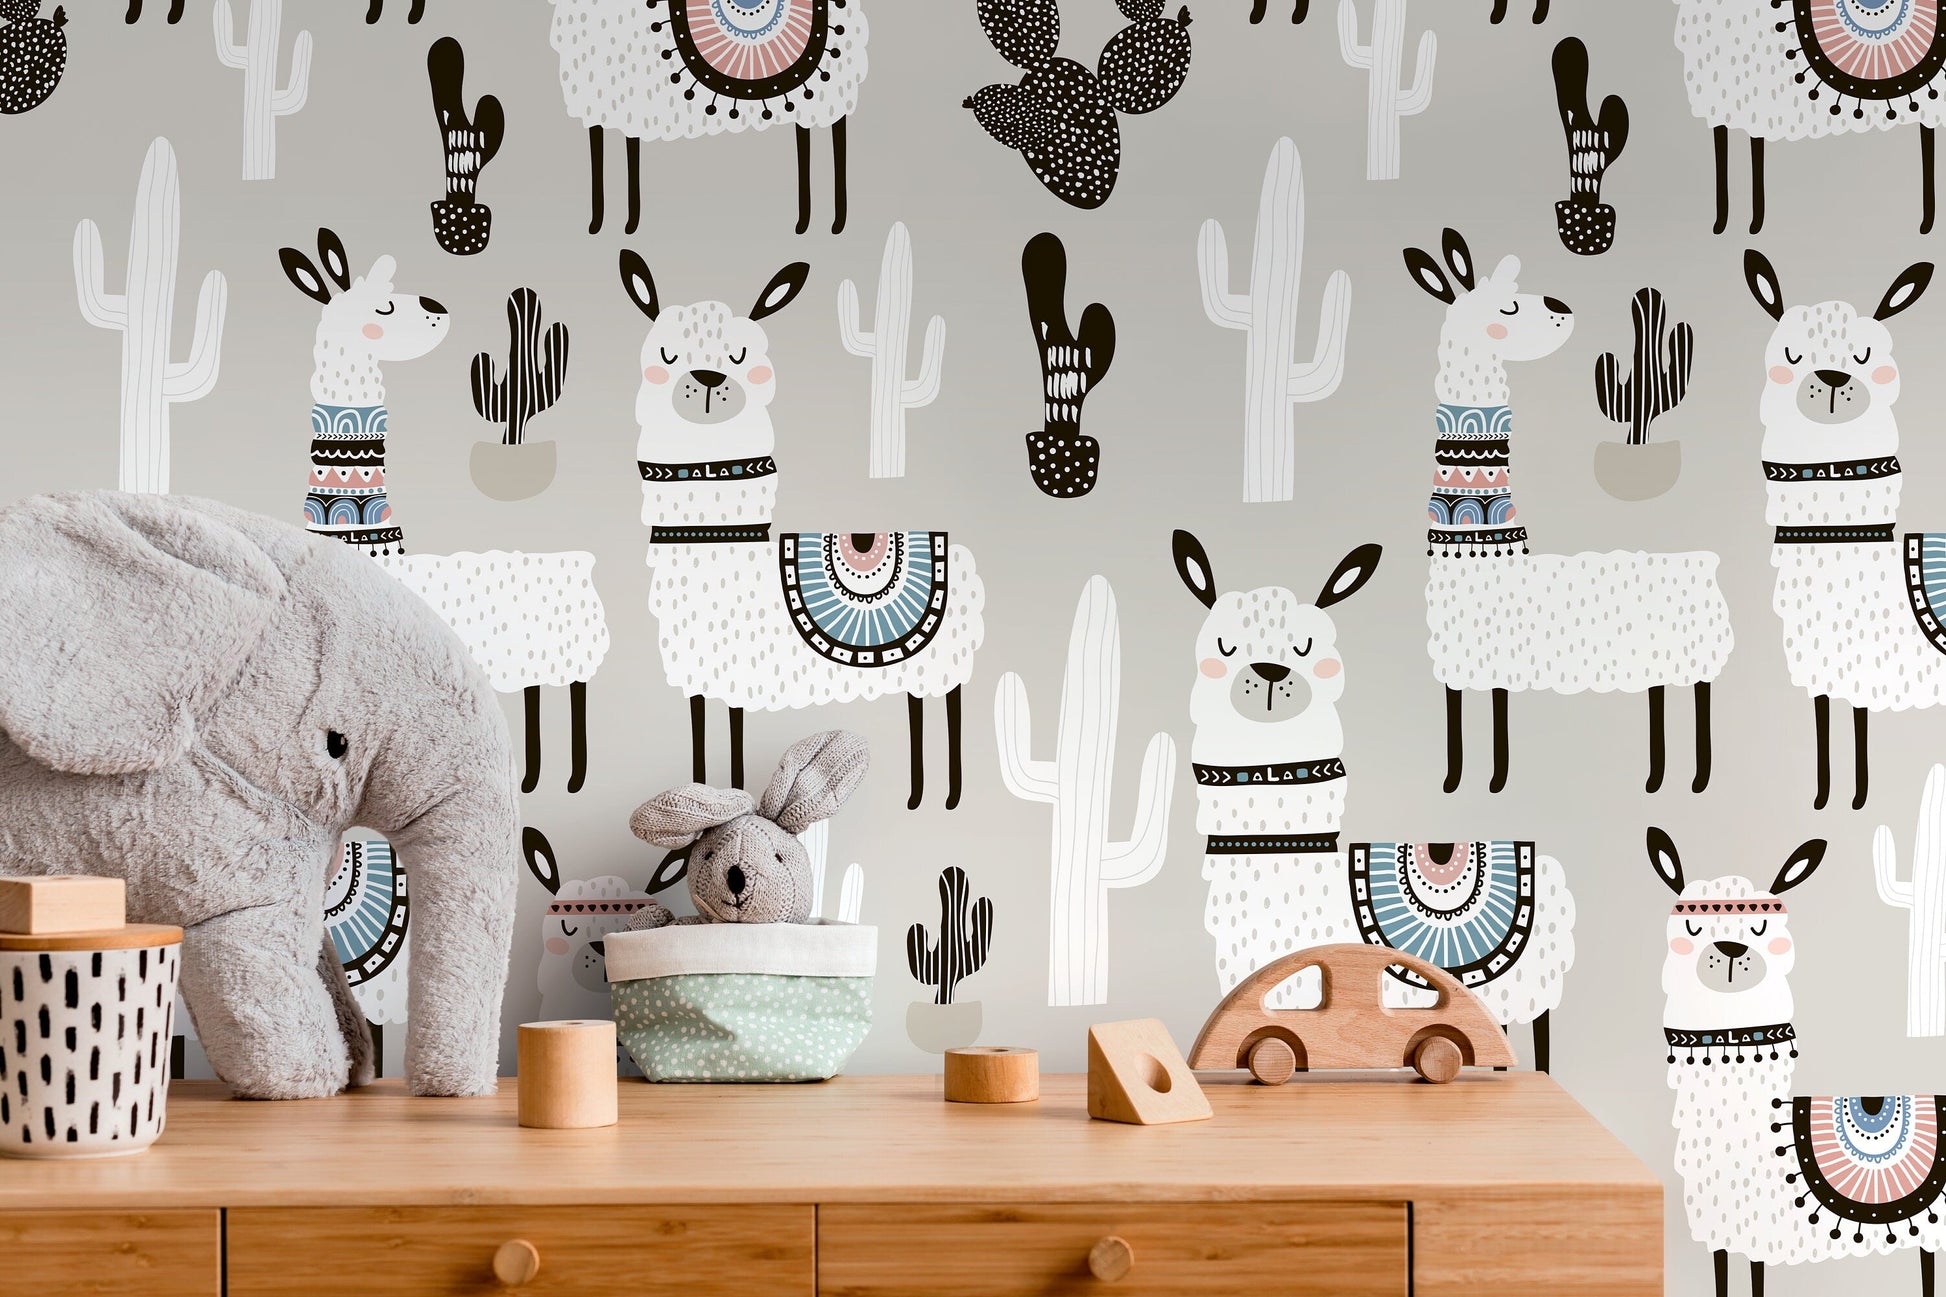 Light Gray Wallpaper for Kids With White Llamas and Cactuses, Nursery Wall Mural, Peel and Stick, Self-Adhesive, Wall Decor - CC-D078